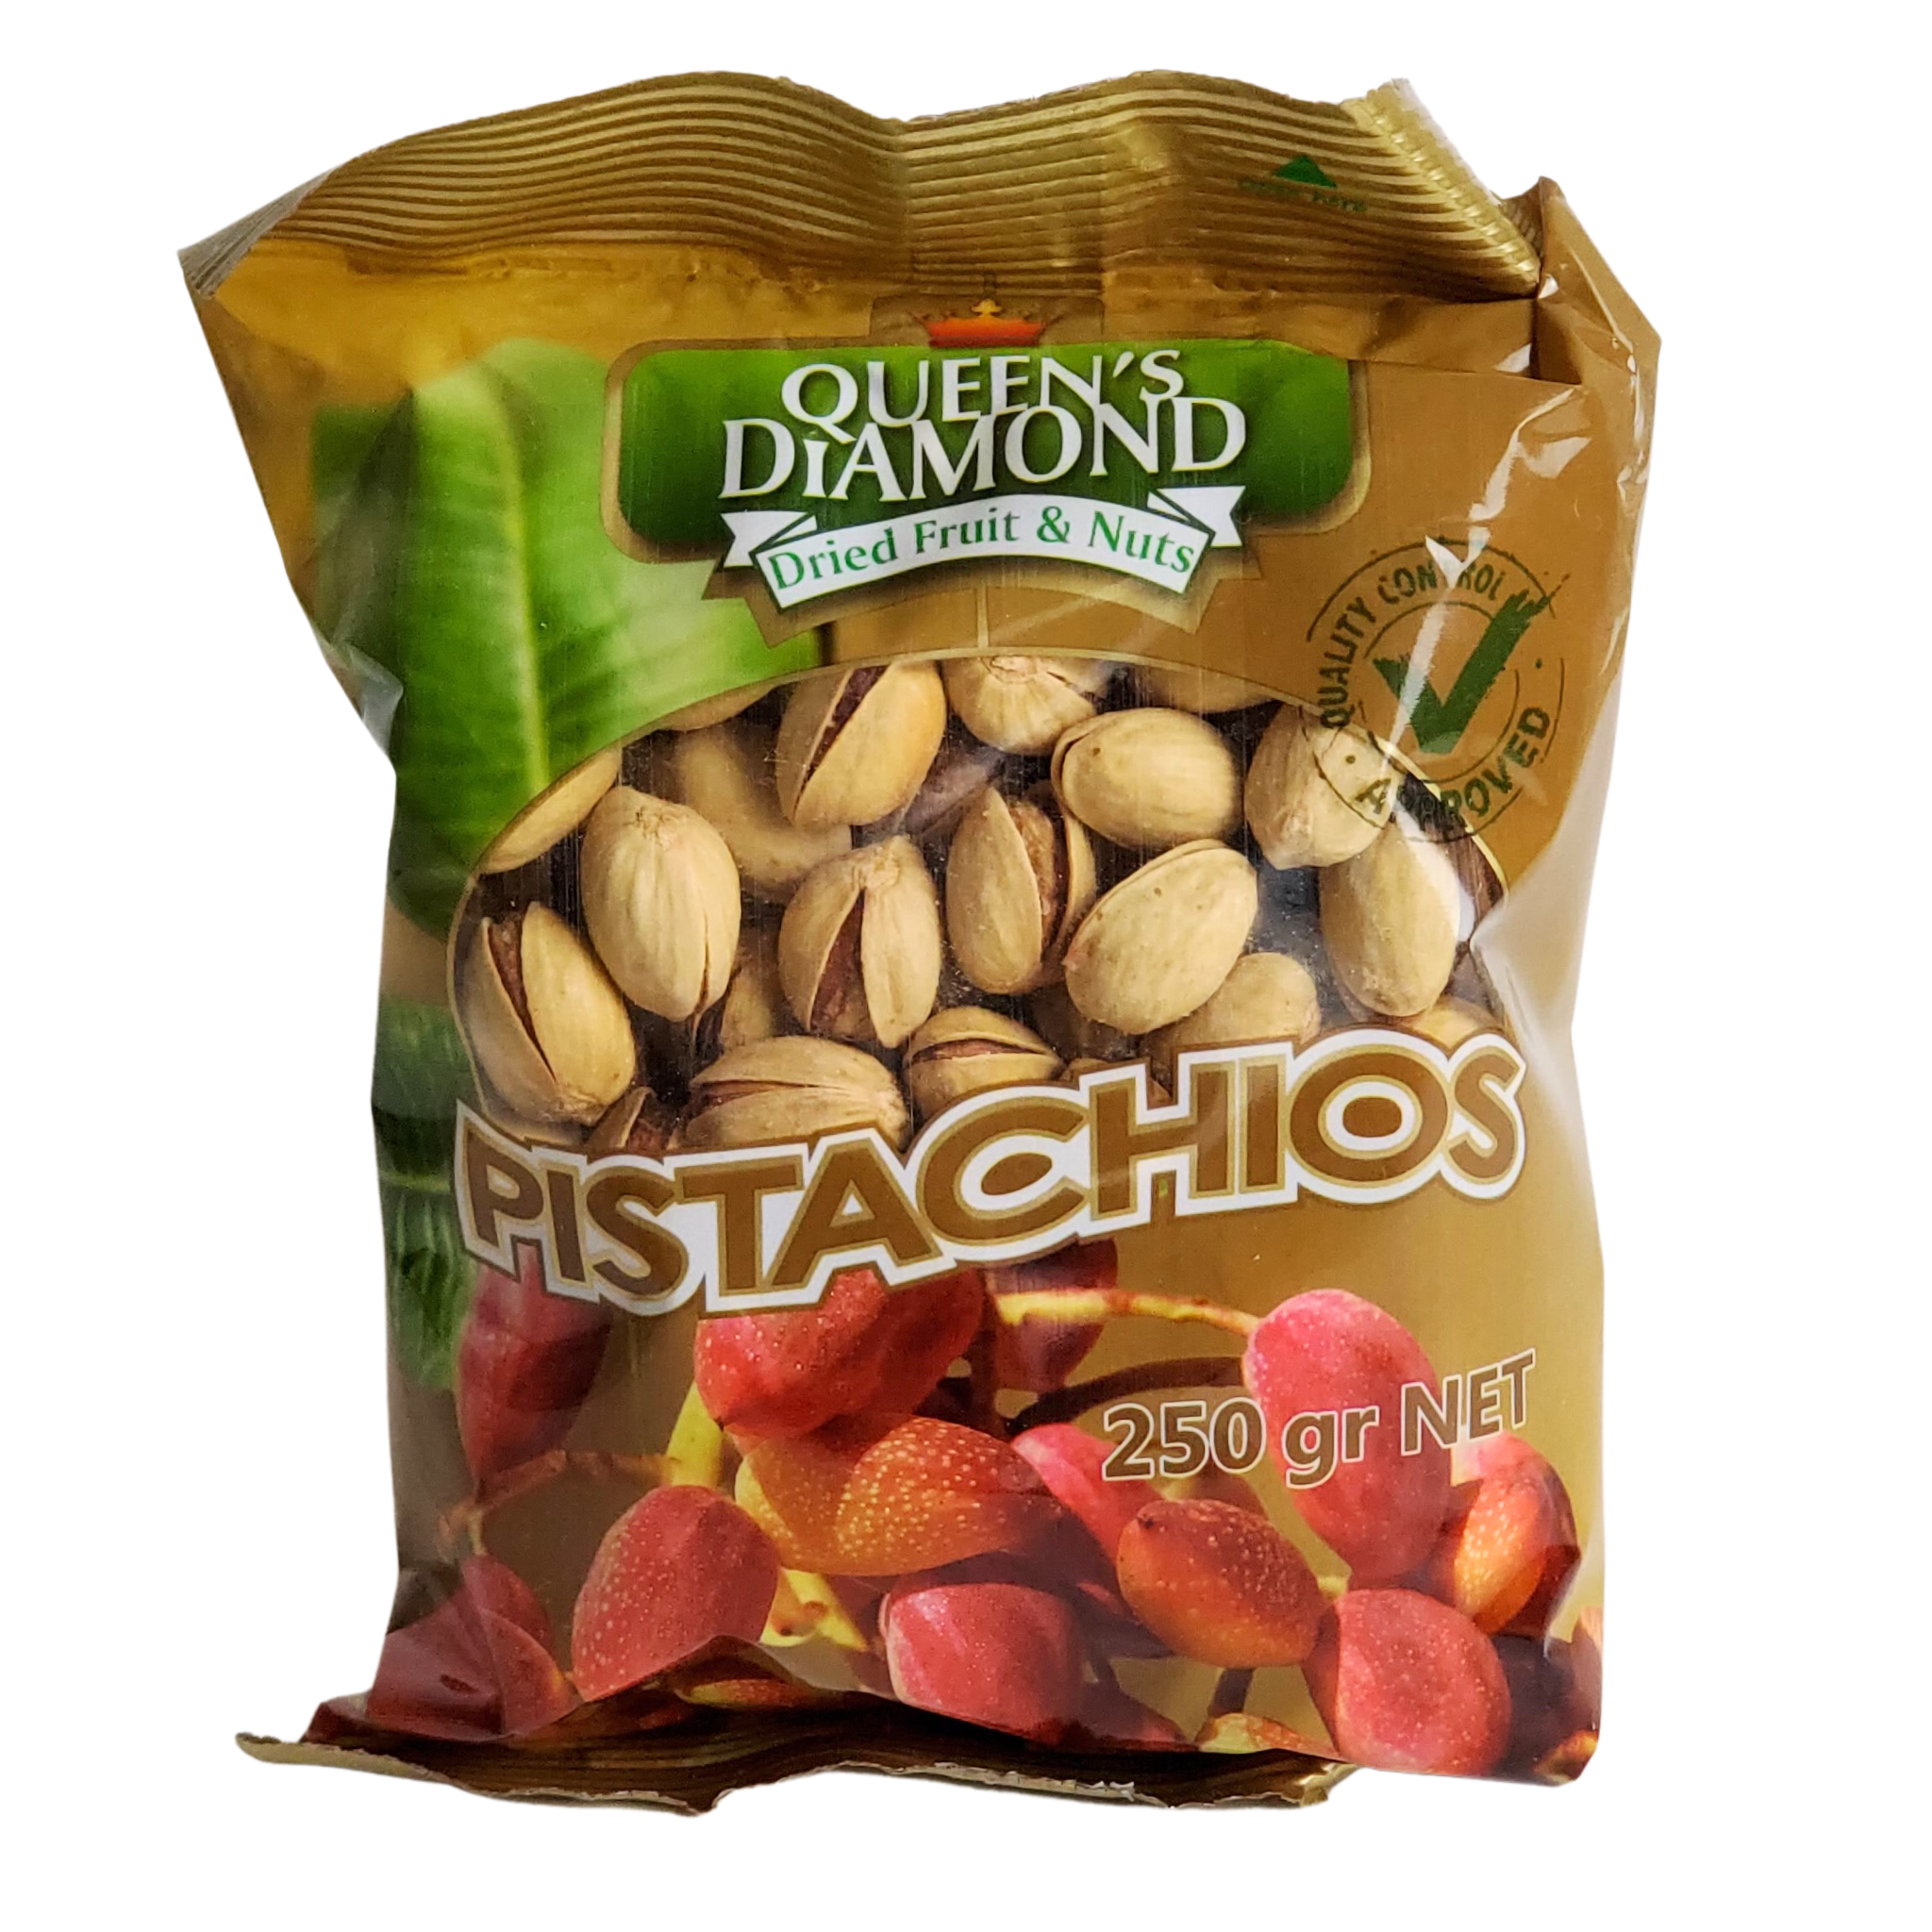 Queen's Diamond Dried Fruit and Nuts Pistachios